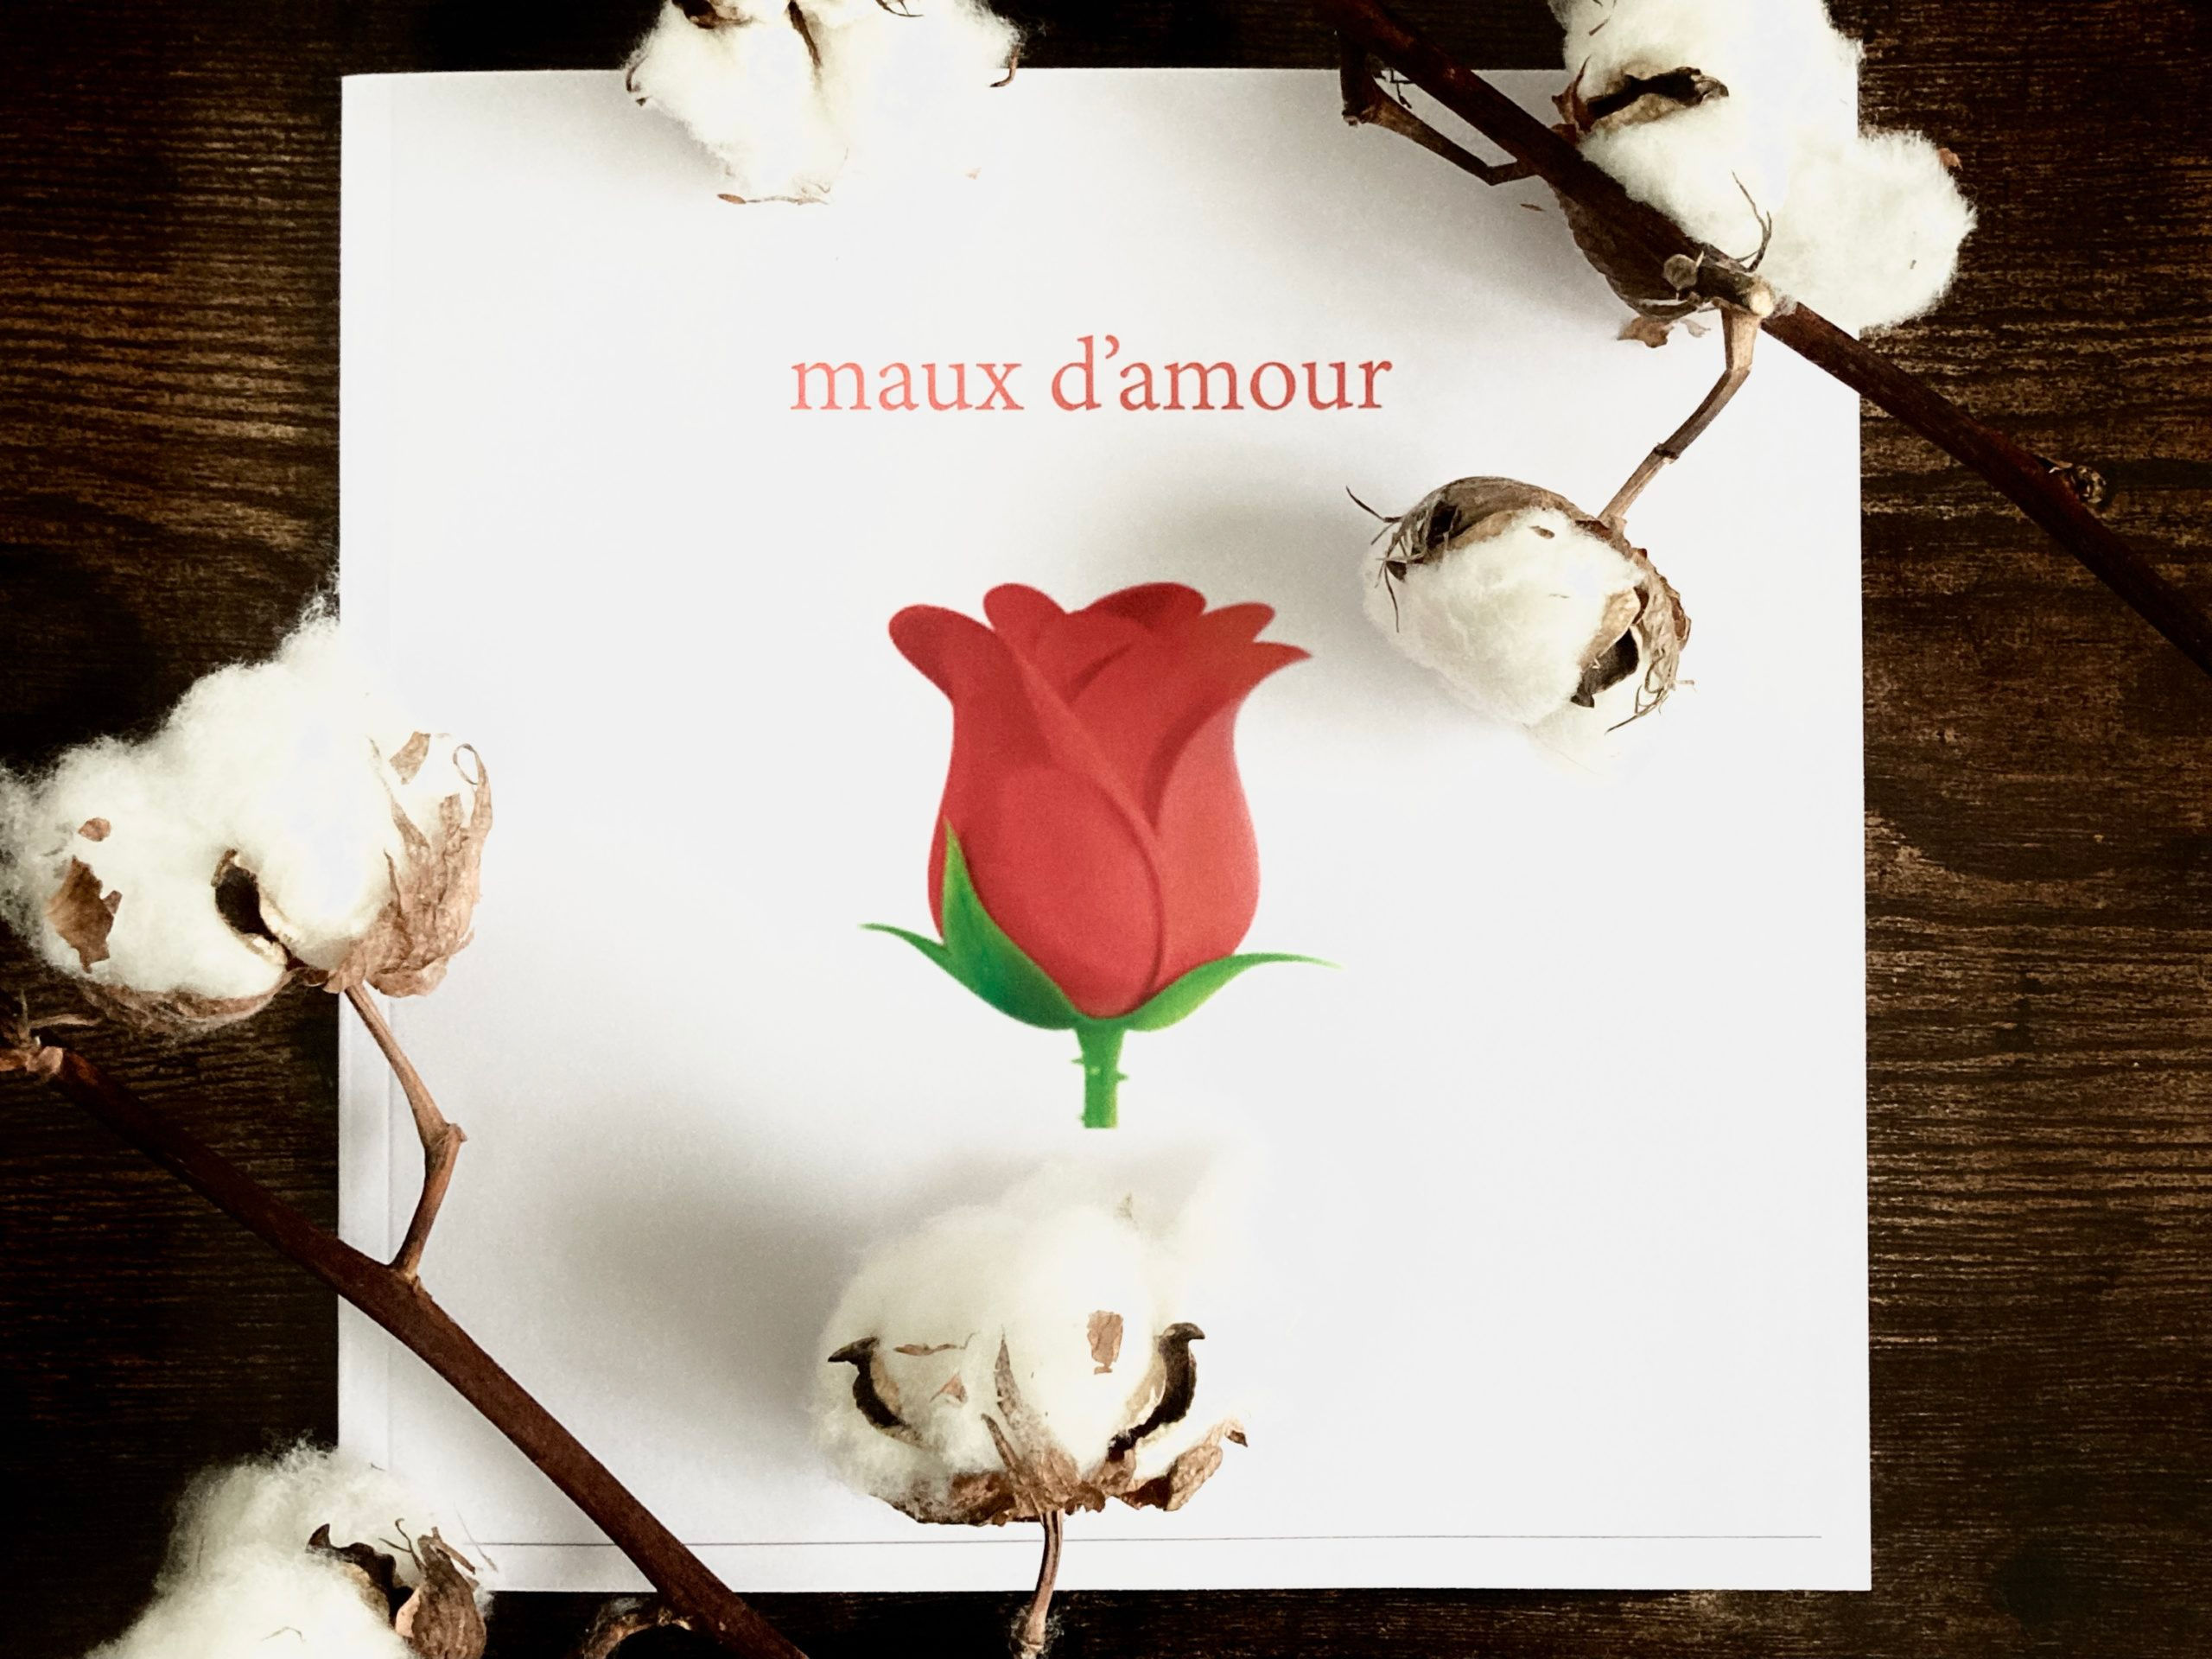 Maux d’amour – Gael Barboza